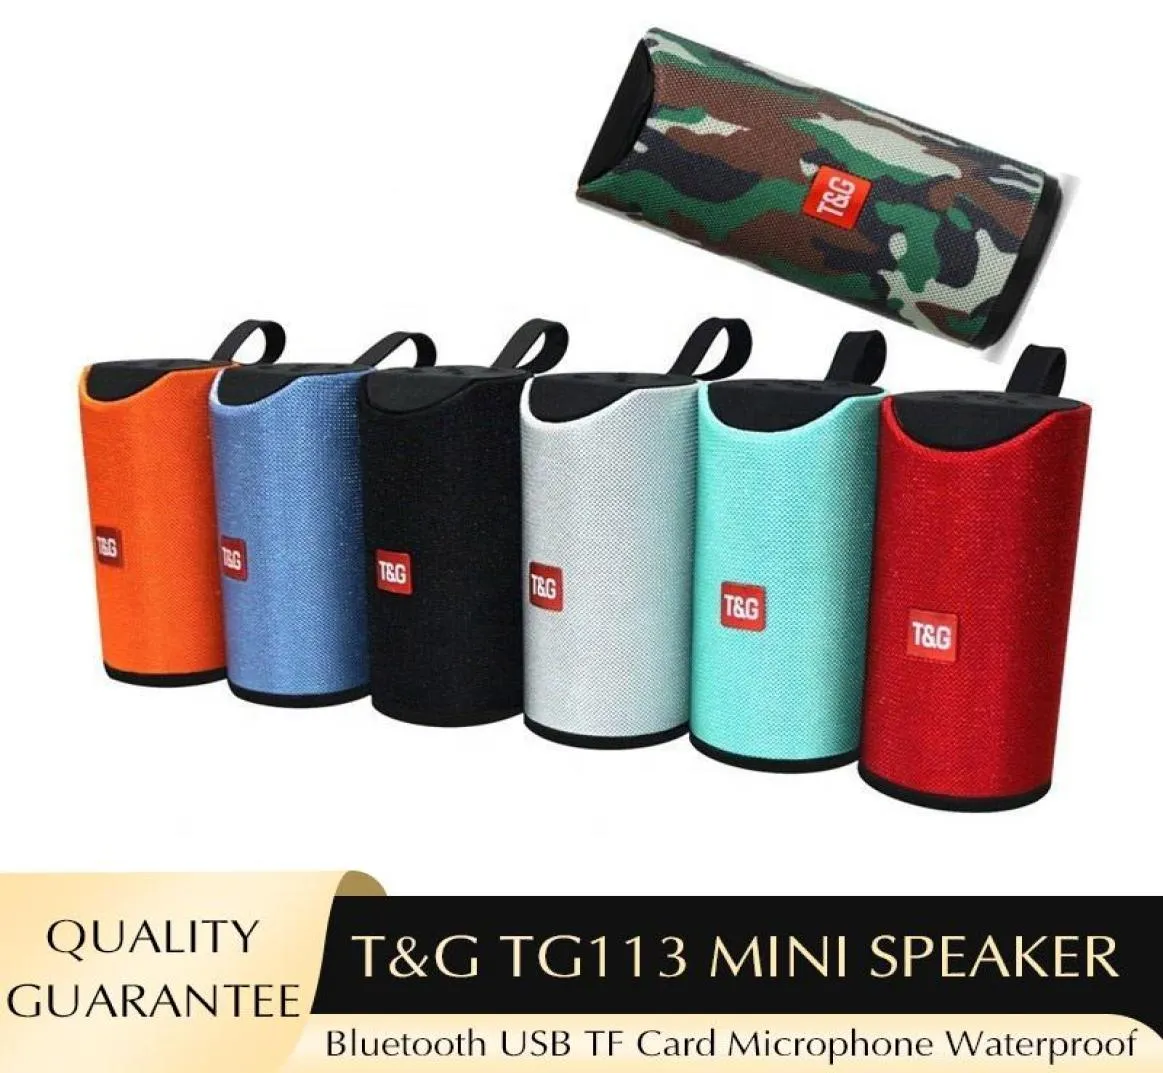 High Sound Quality TG TG113 Mini Speaker 7 COlors Bluetooth Portable Wireless TF Card and USB Disk Waterproof function8013269